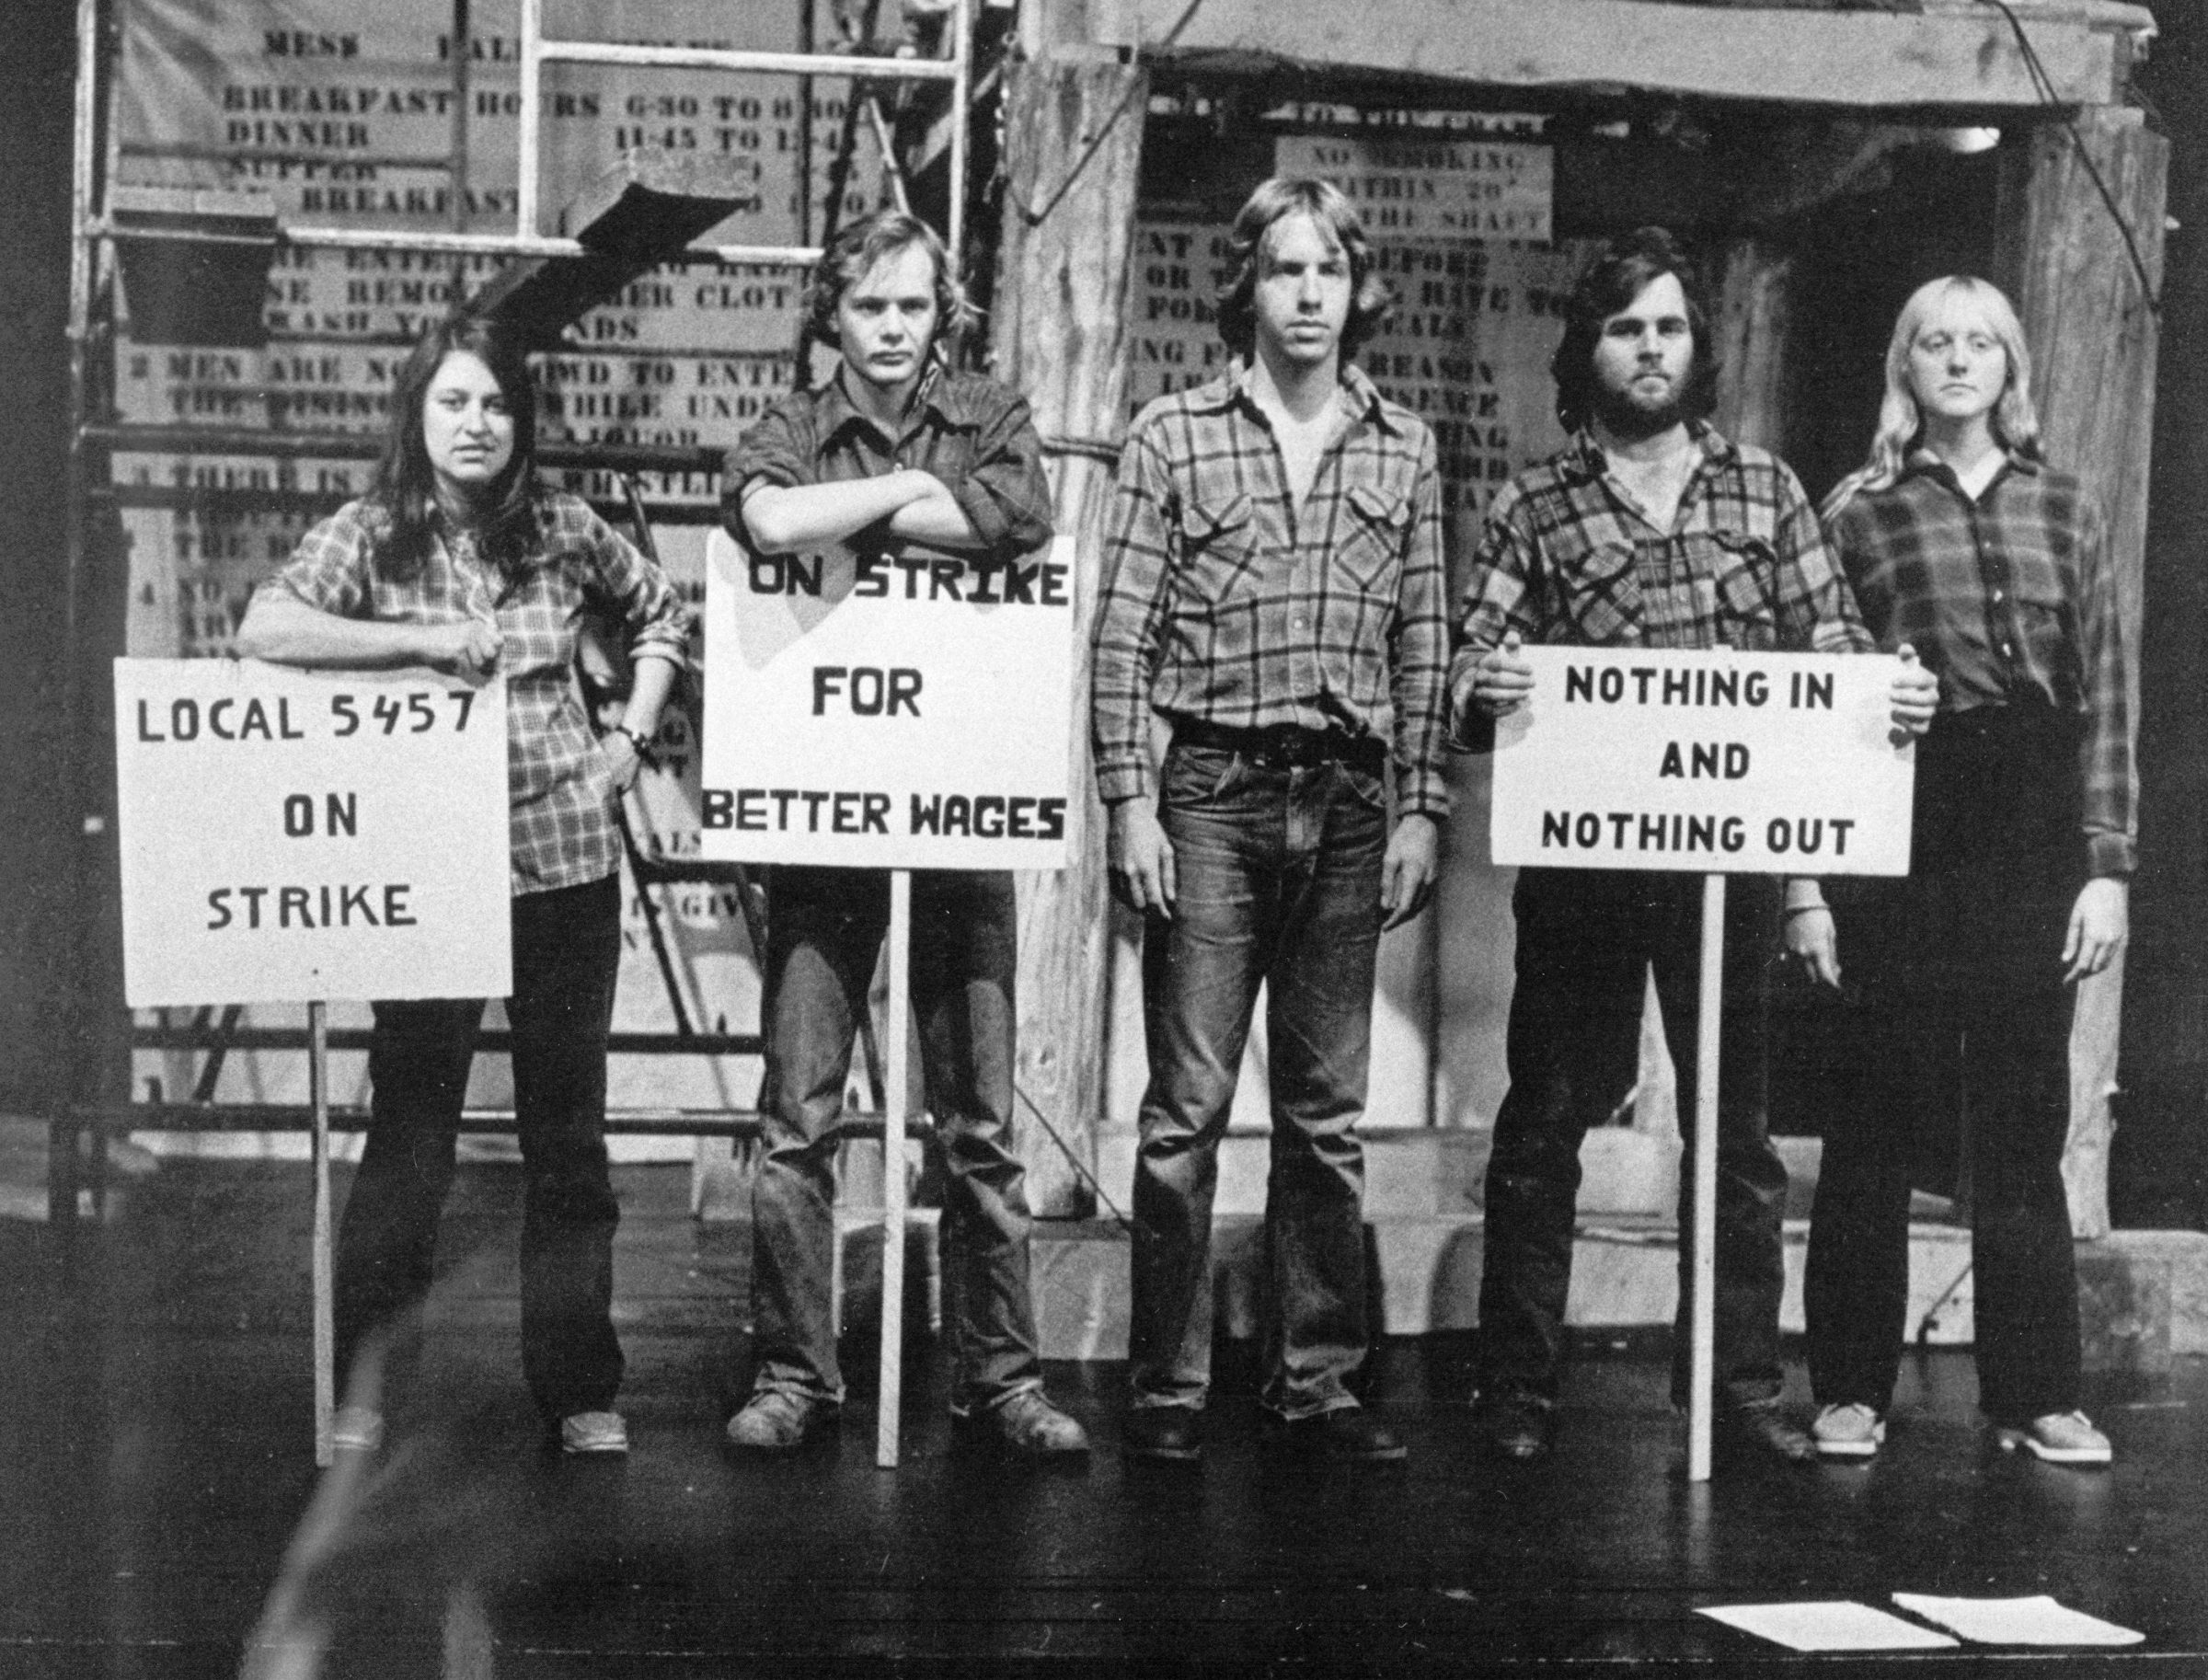 A black and white photo of 5 people with 3 strike signs in front of them. They're each wearing jeans and plaid shirts.